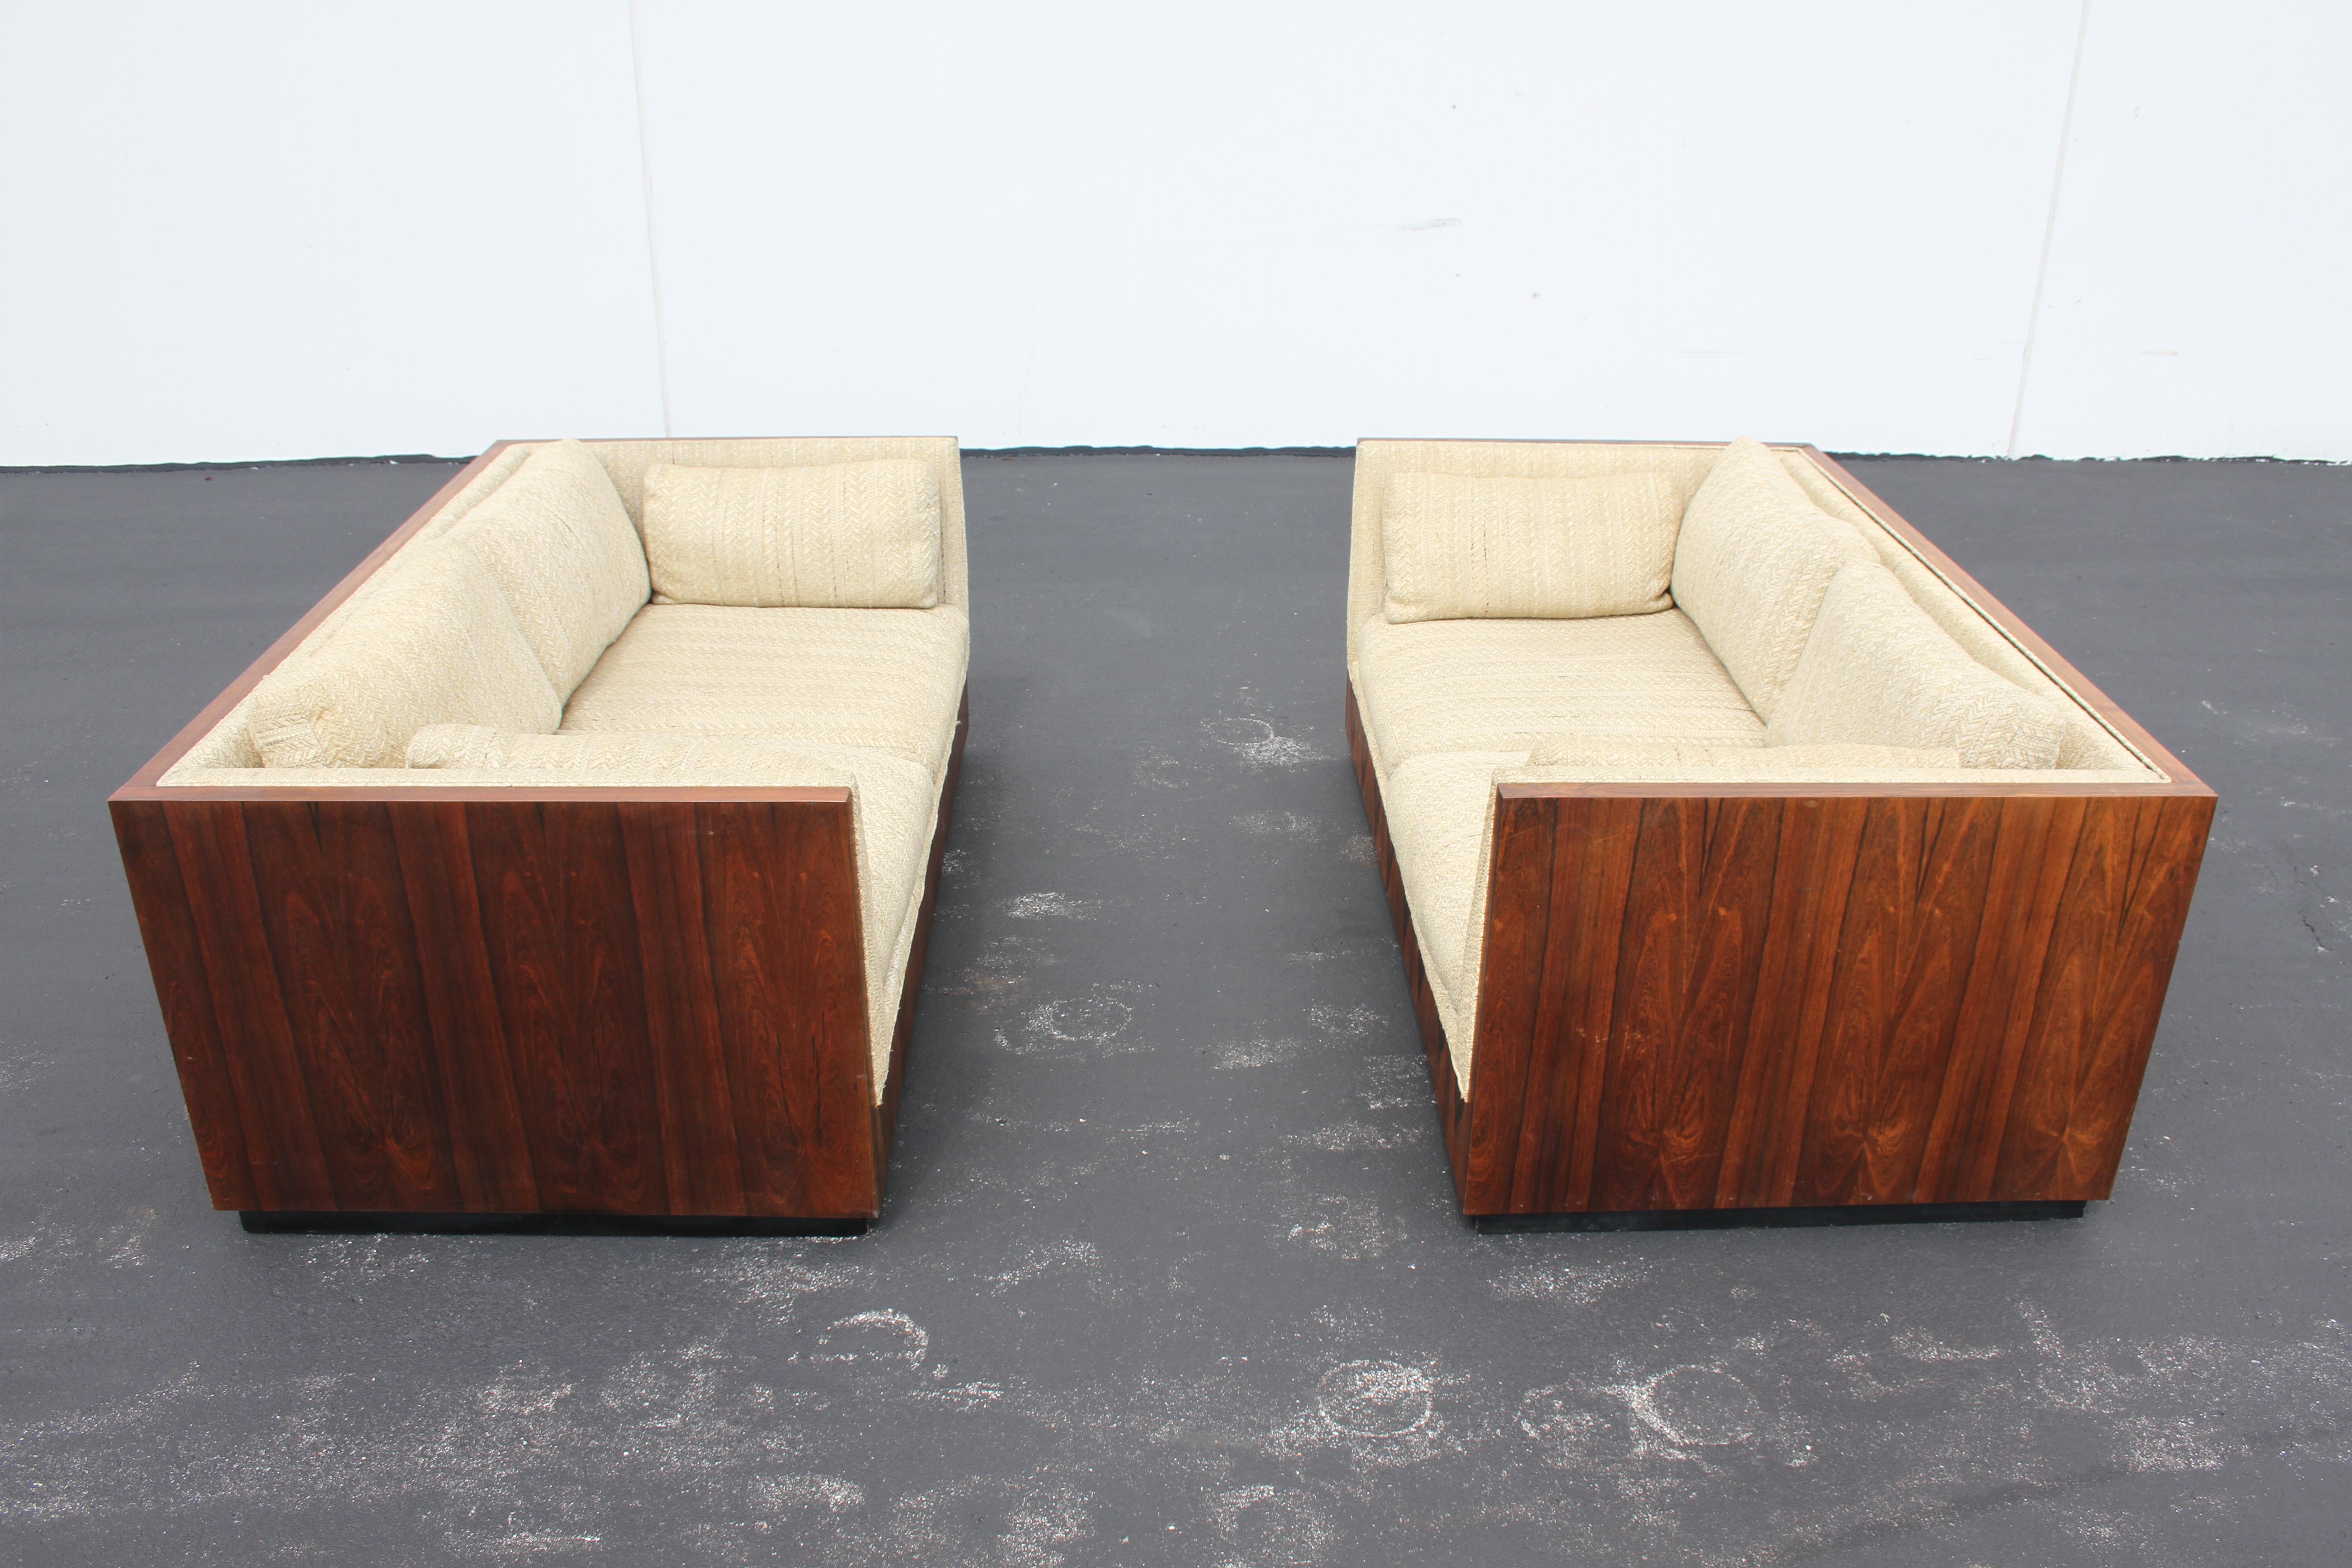 Pair of Milo Baughman for Thayer-Coggin model 1976 cubed formed settees with rosewood veneer on black floating base. Shown in all original condition with sun fading to finish, (Price includes refinishing of rosewood), work to be done prior to